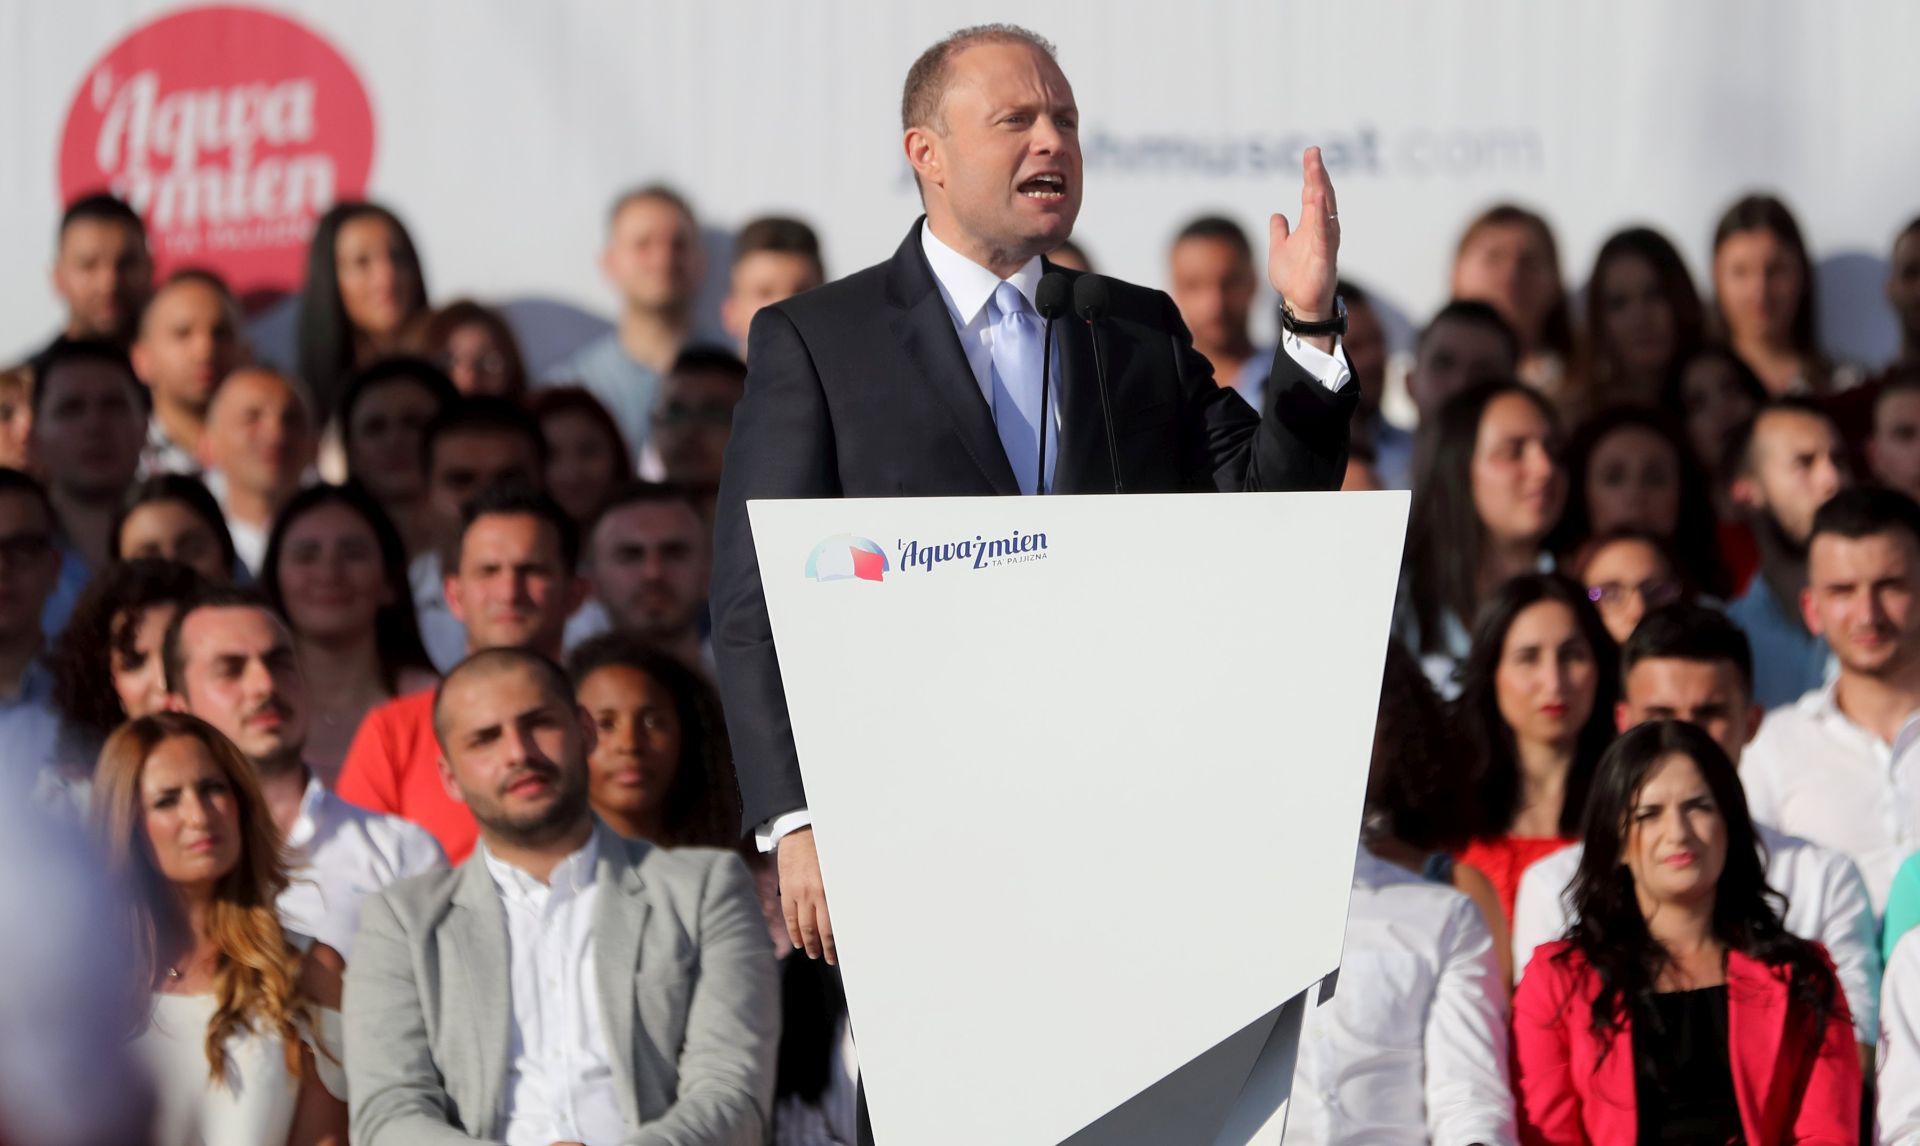 epa05996161 Malta Prime Minister and Malta Partit Laburista (Labour Party) leader Joseph Muscat (C) speaks during the PL mass meeting in Floriana, Malta, 28 May 2017. Malta will hold a general election on 03 June 2017.  EPA/DOMENIC AQUILINA